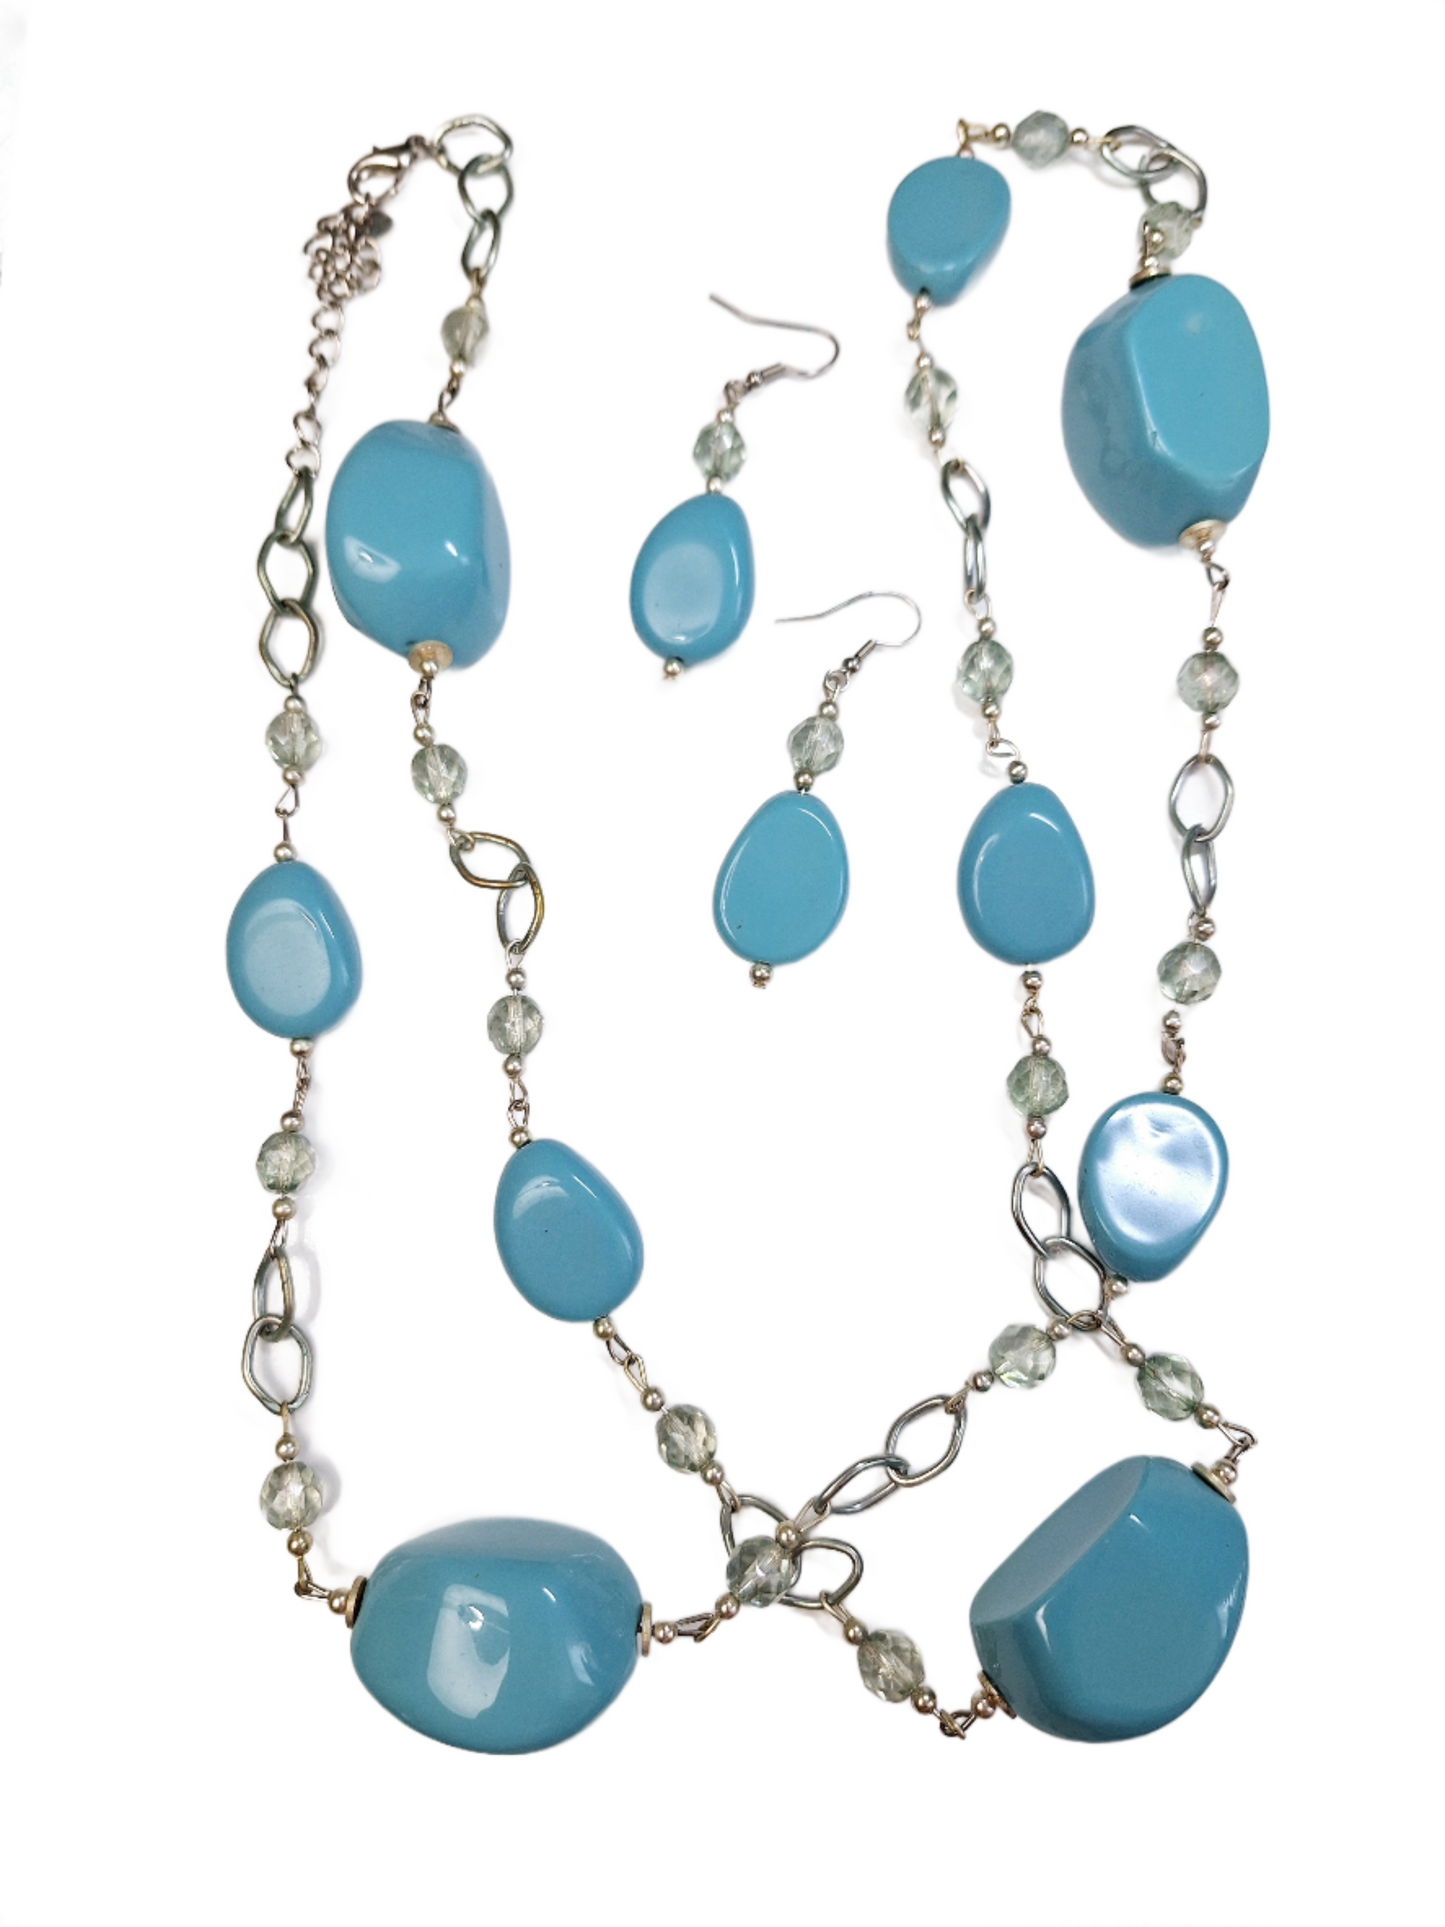 Aqua blue Necklace with earrings